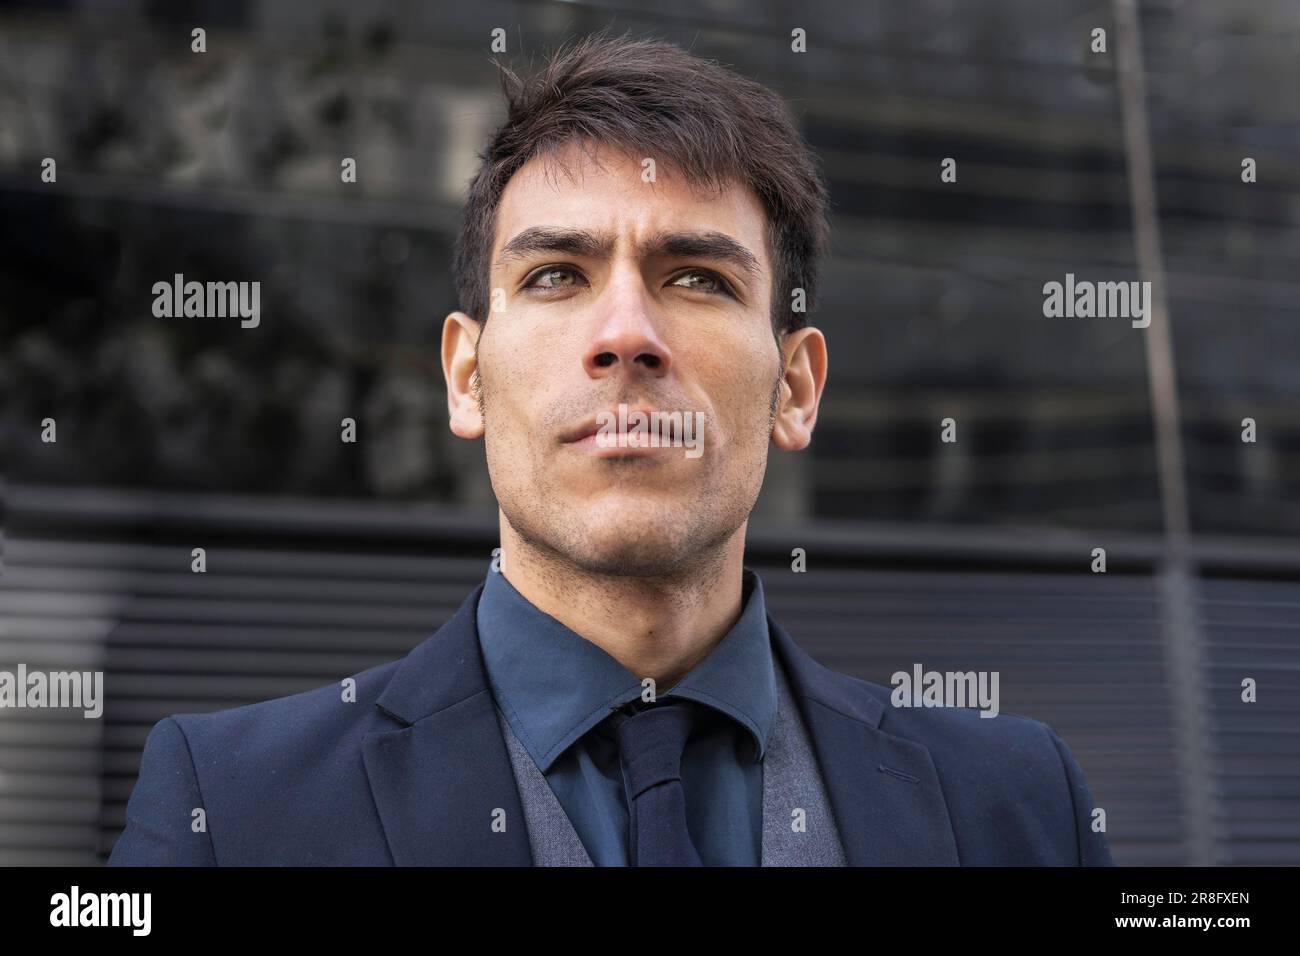 Low-angle view of an attractive executive man looking away Stock Photo